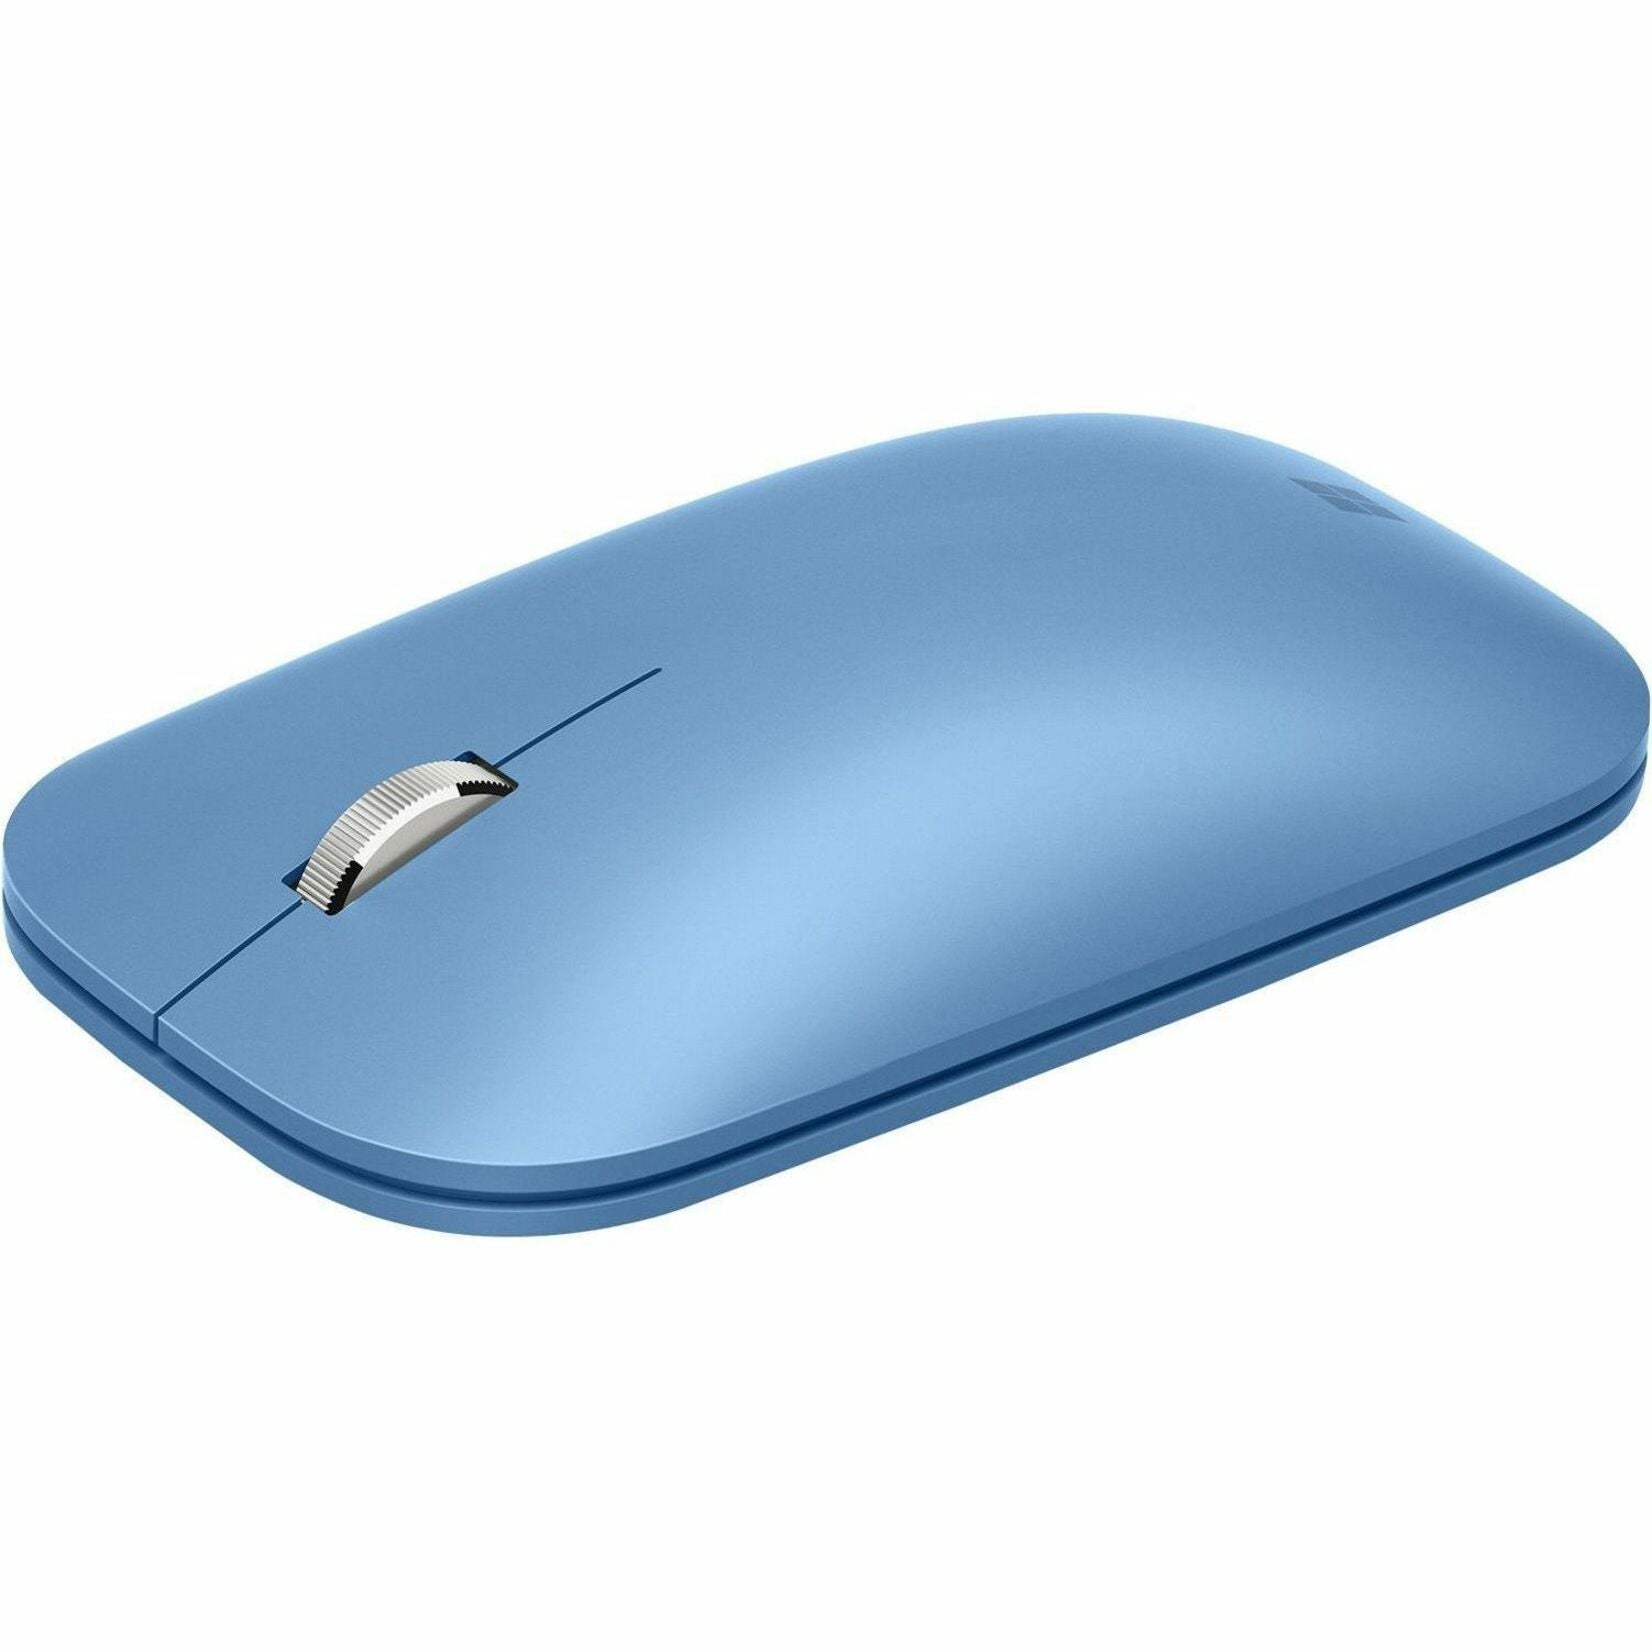 Microsoft KTF-00069 Modern Mobile Mouse Bluetooth Sapphire, Wireless Optical Mouse